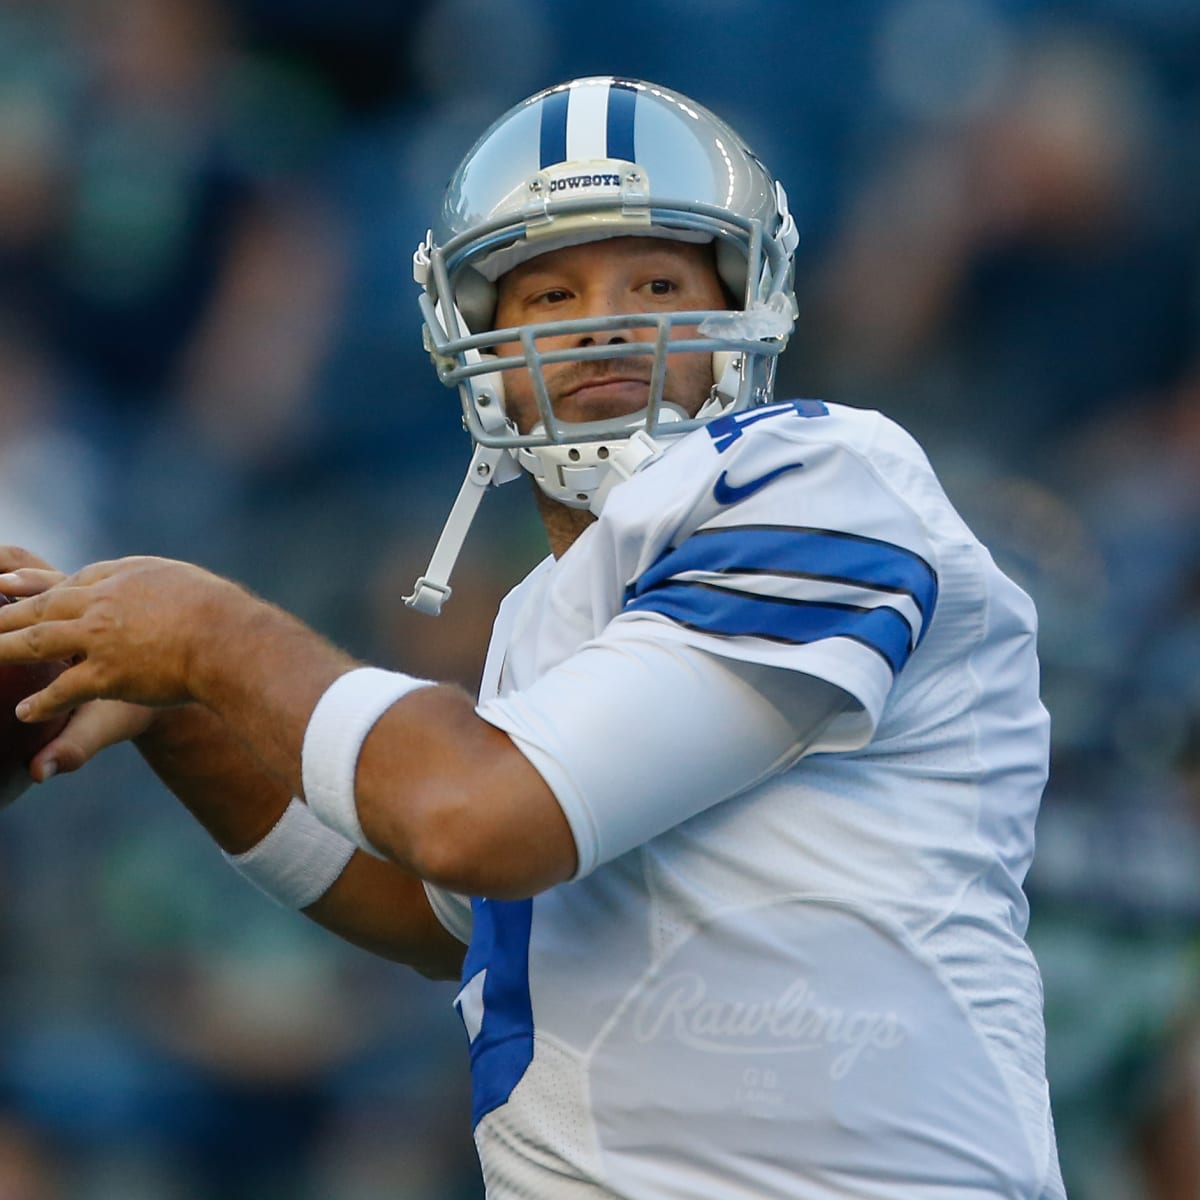 Tony Romo injured as Panthers beat Cowboys to move to 11-0